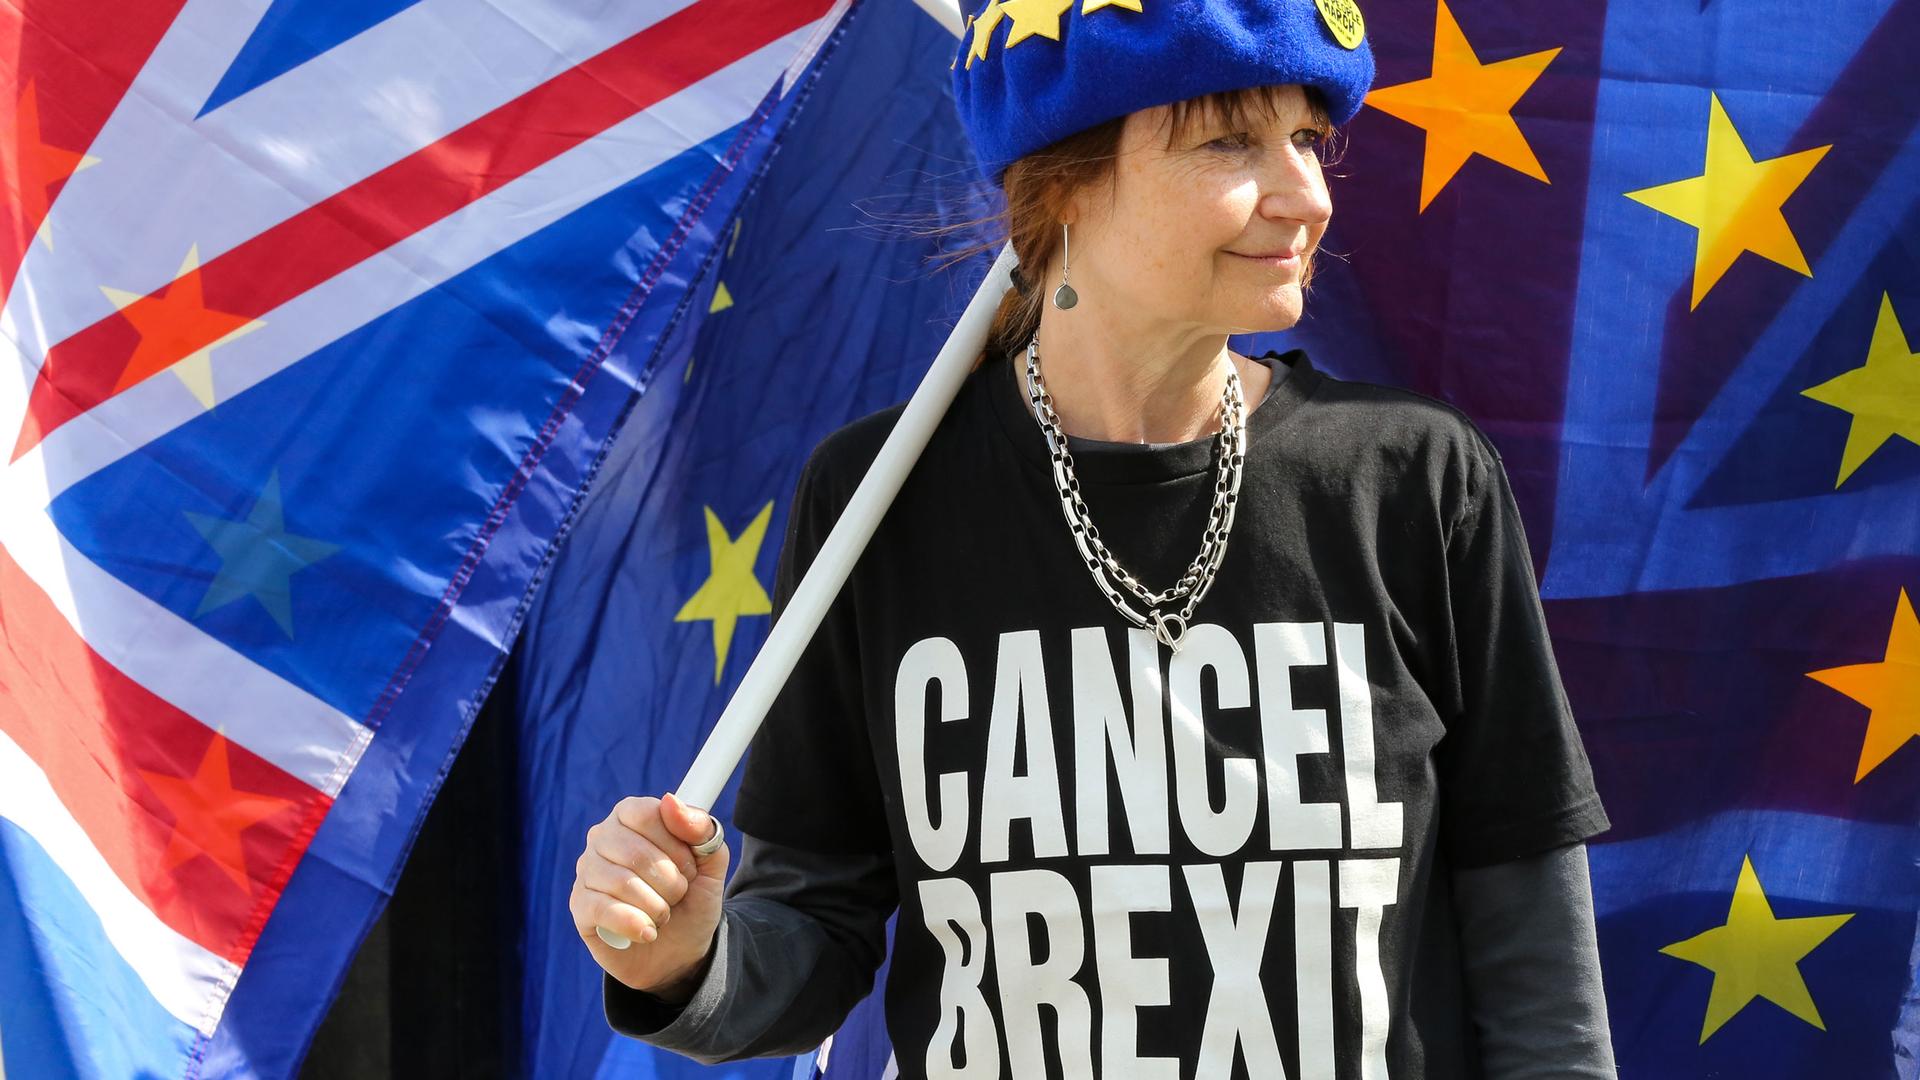 An anti-Brexit demonstrator is seen wearing an EU flag cap and a t-shirt with "Cancel Brexit" protesting outside the Houses of Parliament.